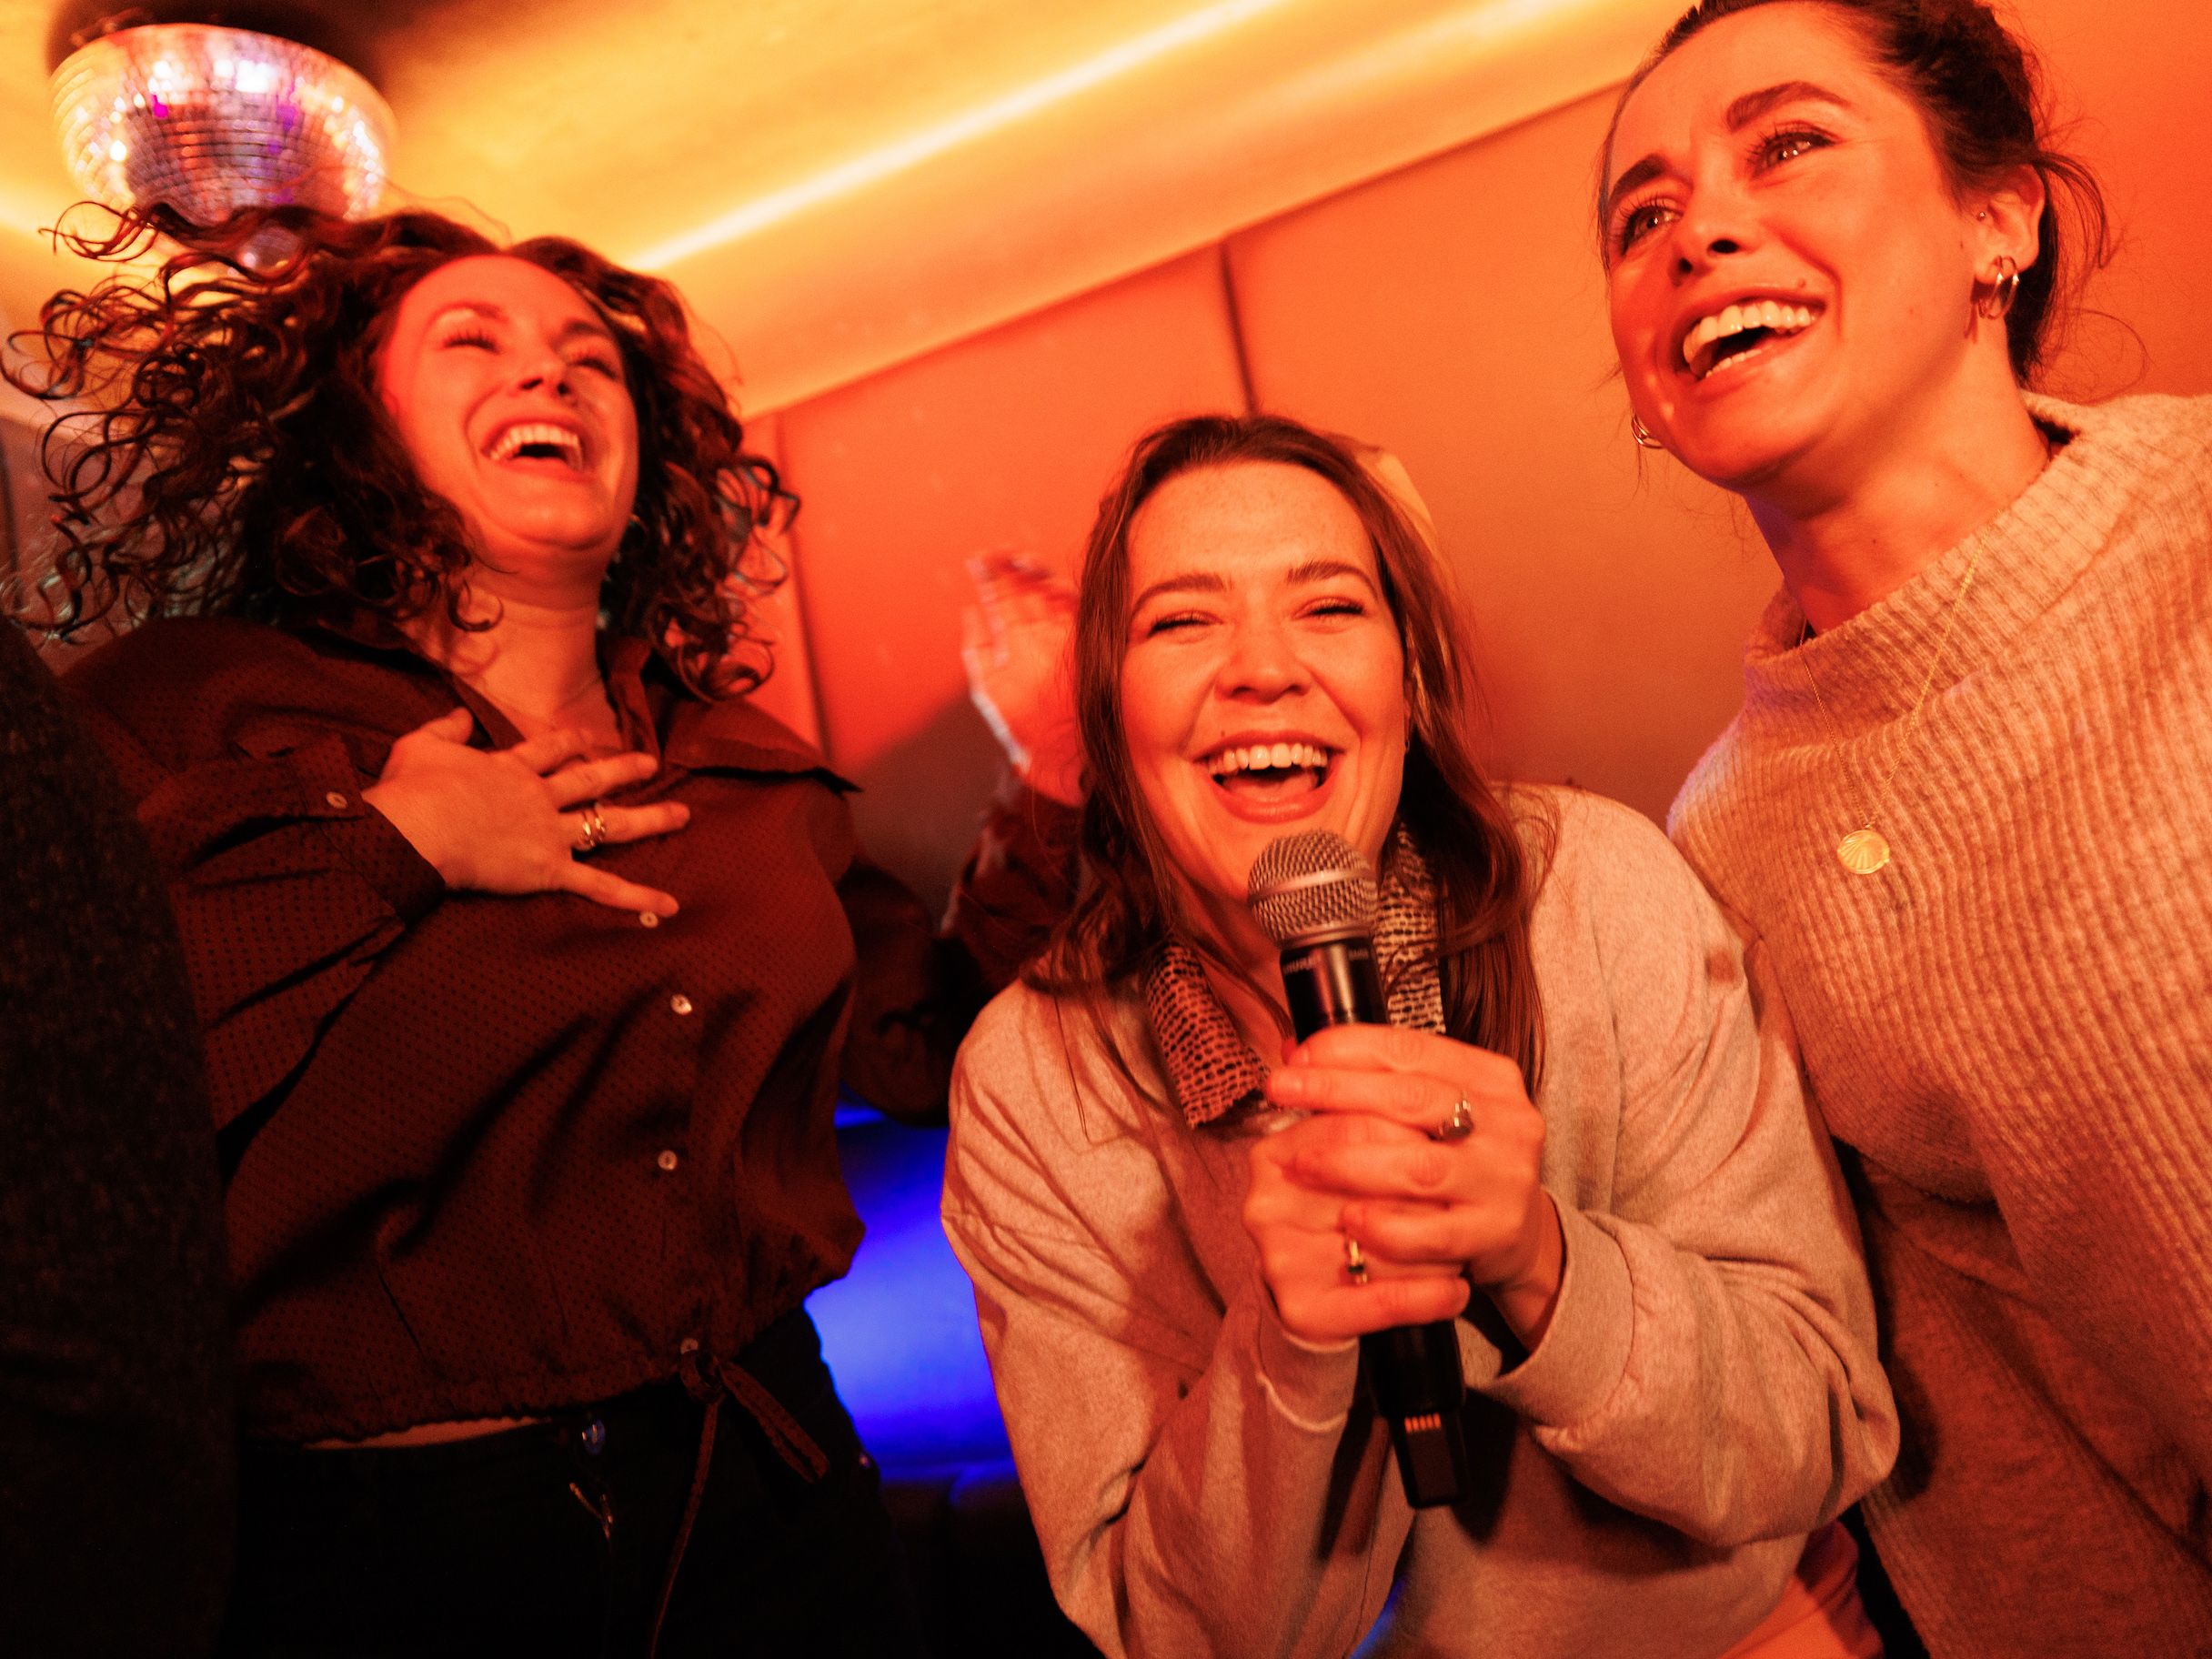 Students get 50% off karaoke, food + selected drinks on Mondays at Lucky Voice Islington, plus 2-4-1 drinks Sun-Fri before 8pm. 